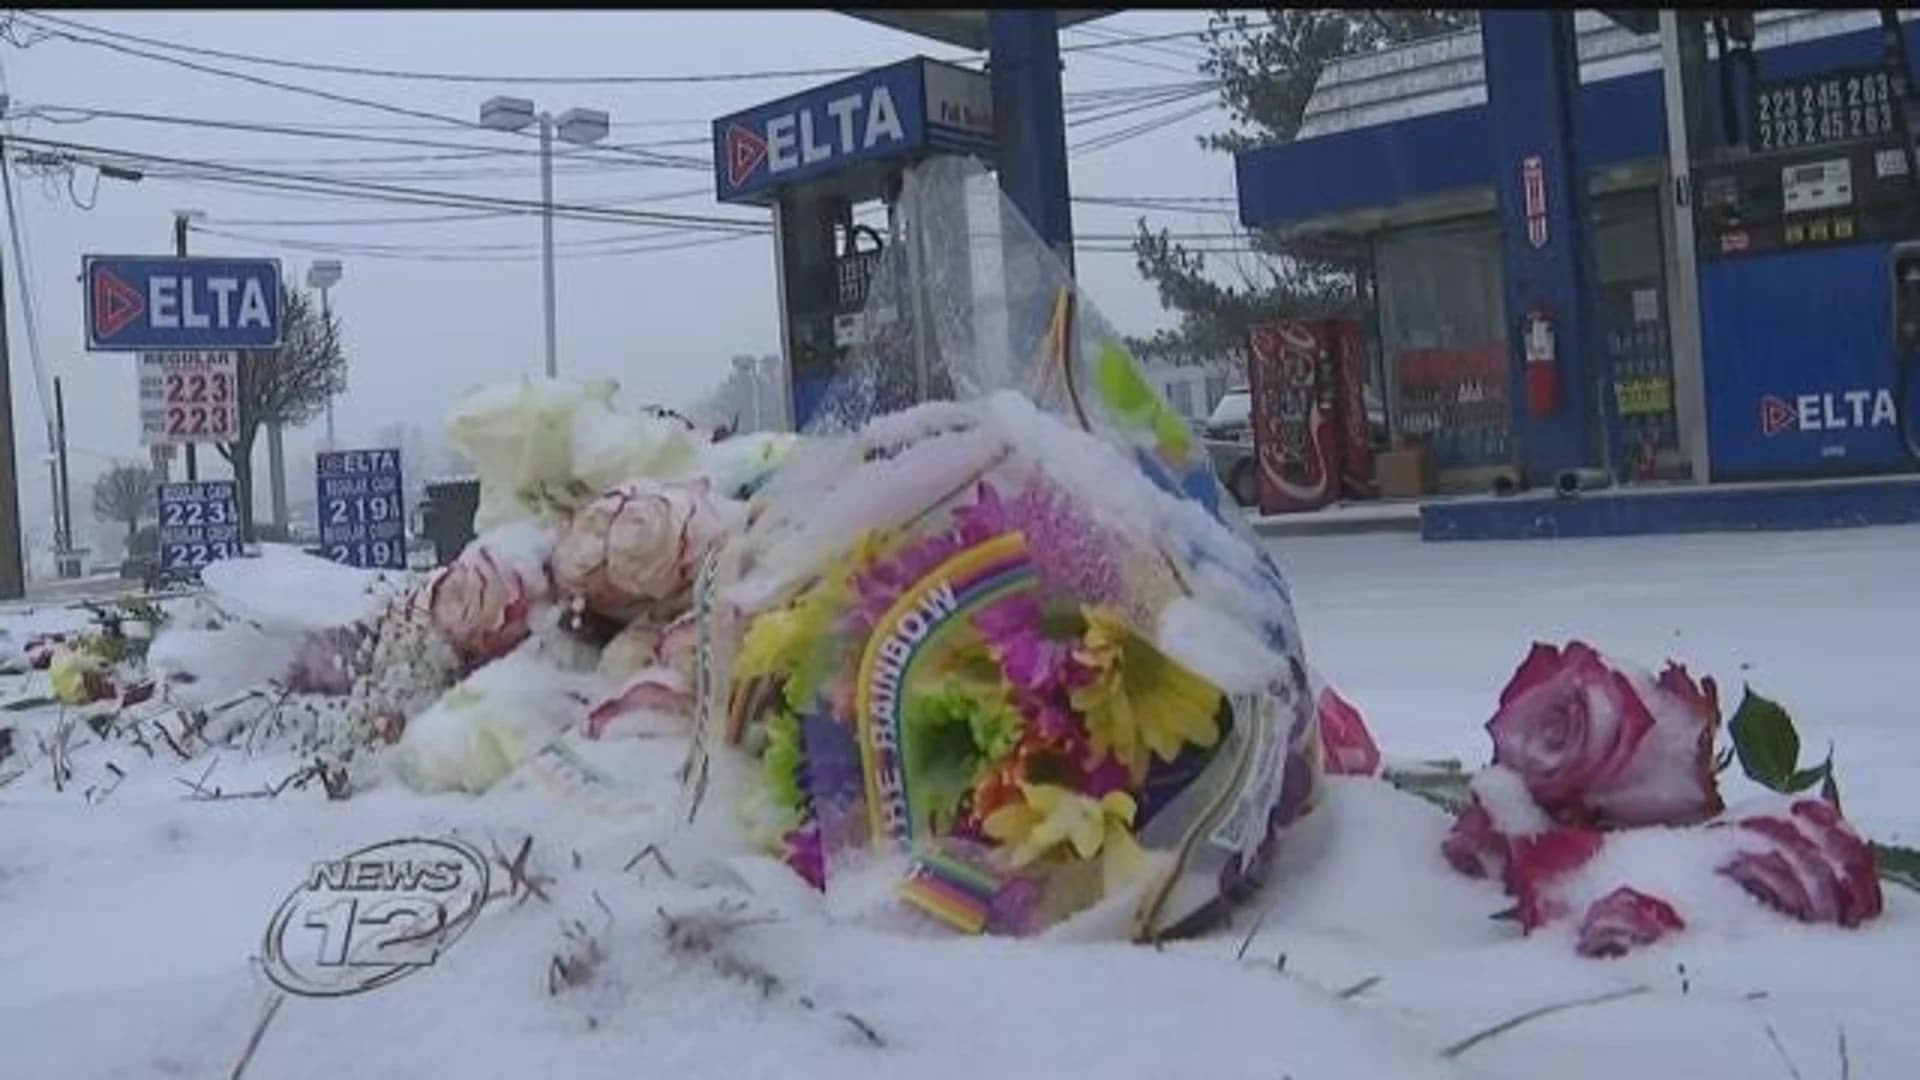 ‘You’re just not human’ - Friends outraged by deadly gas station crash